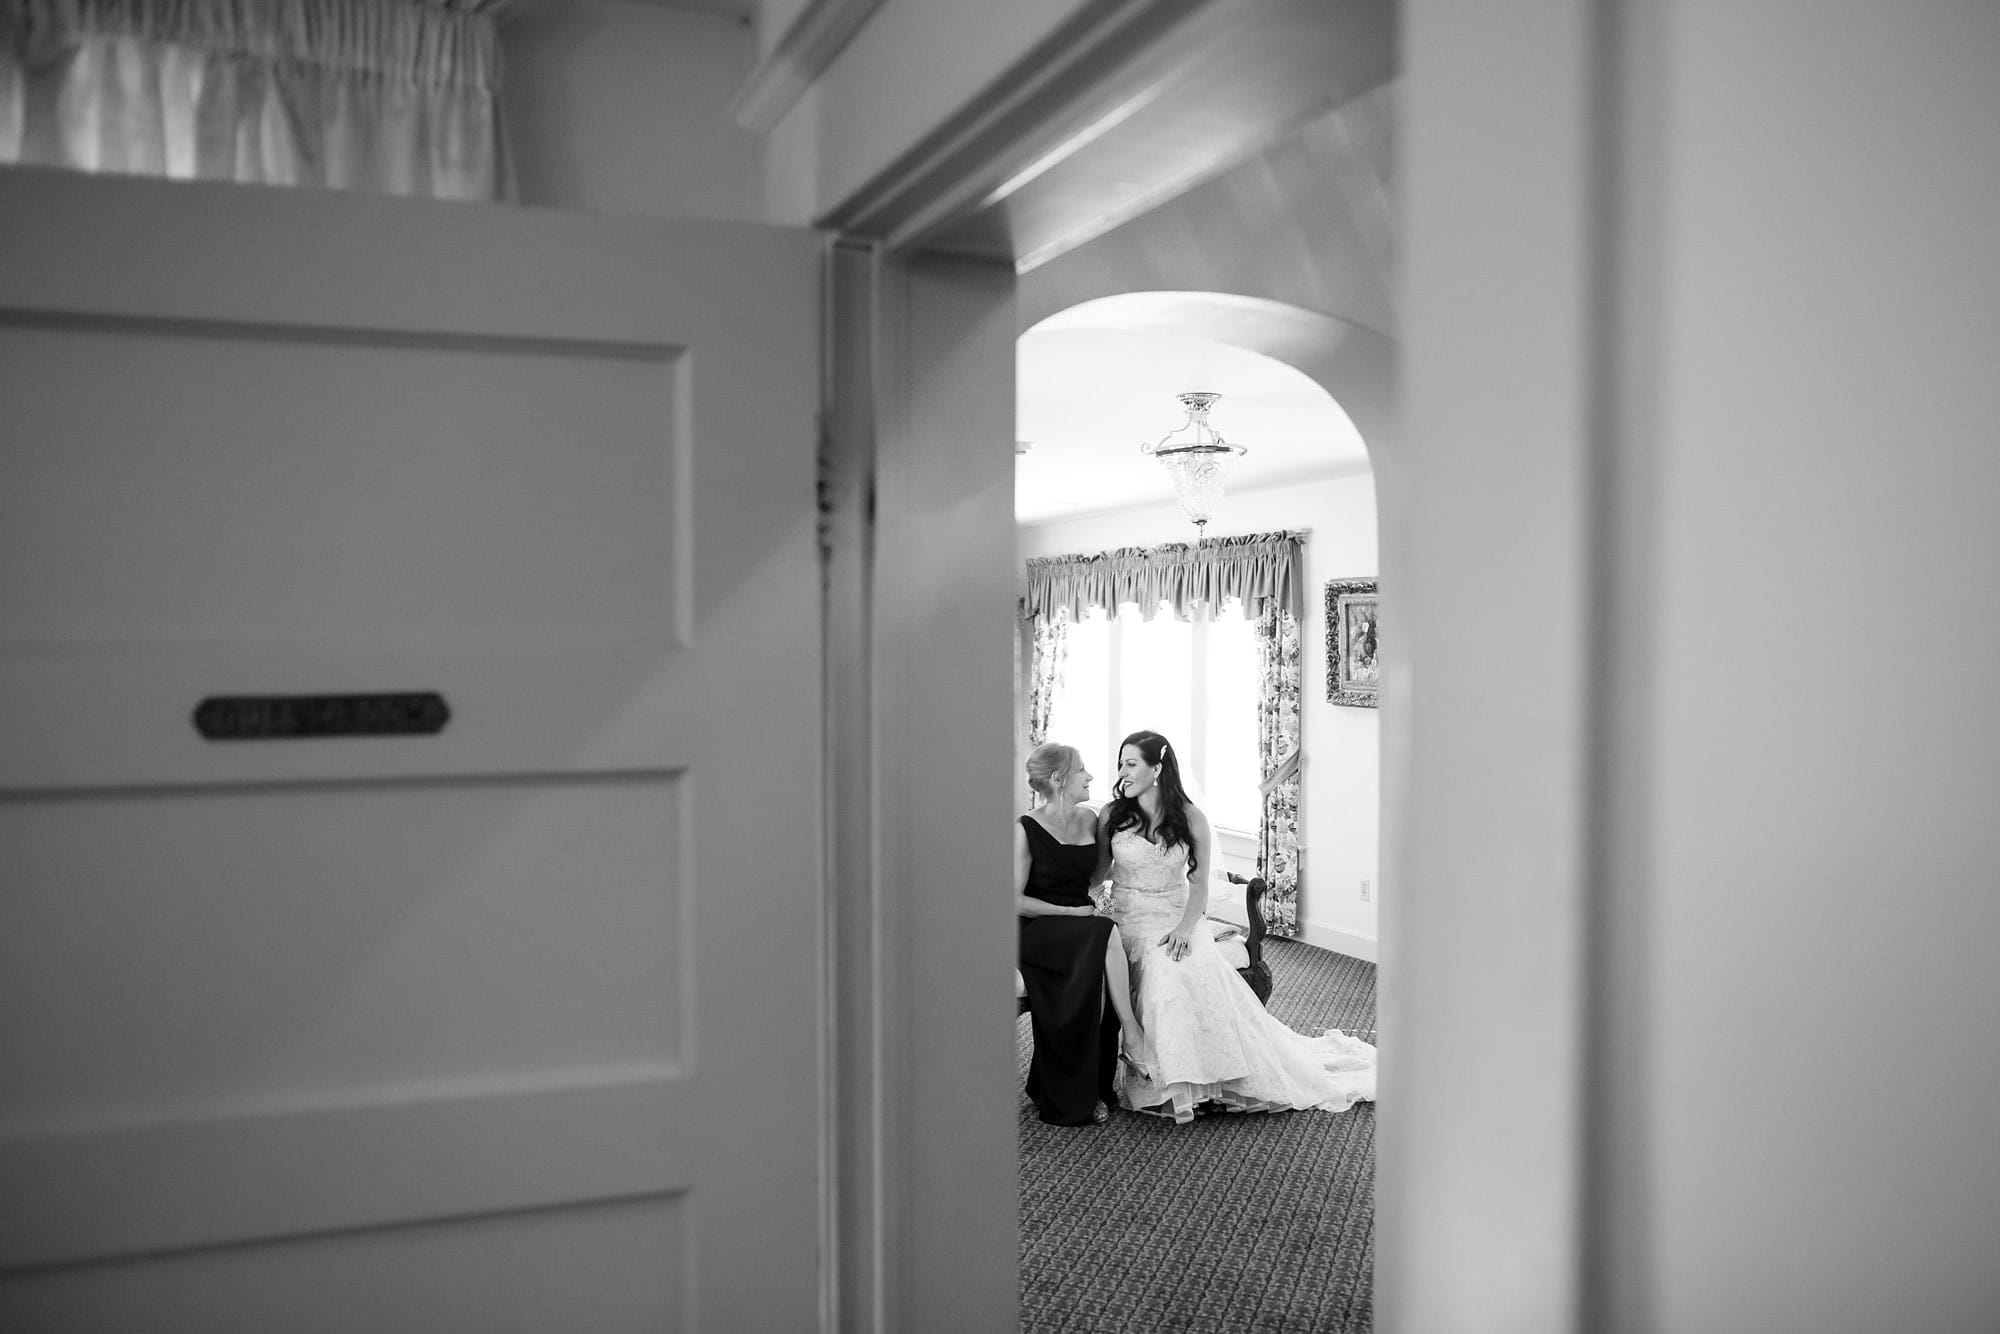 Gina and her monther have a moment before her wedding inside Willow Ridge Manor